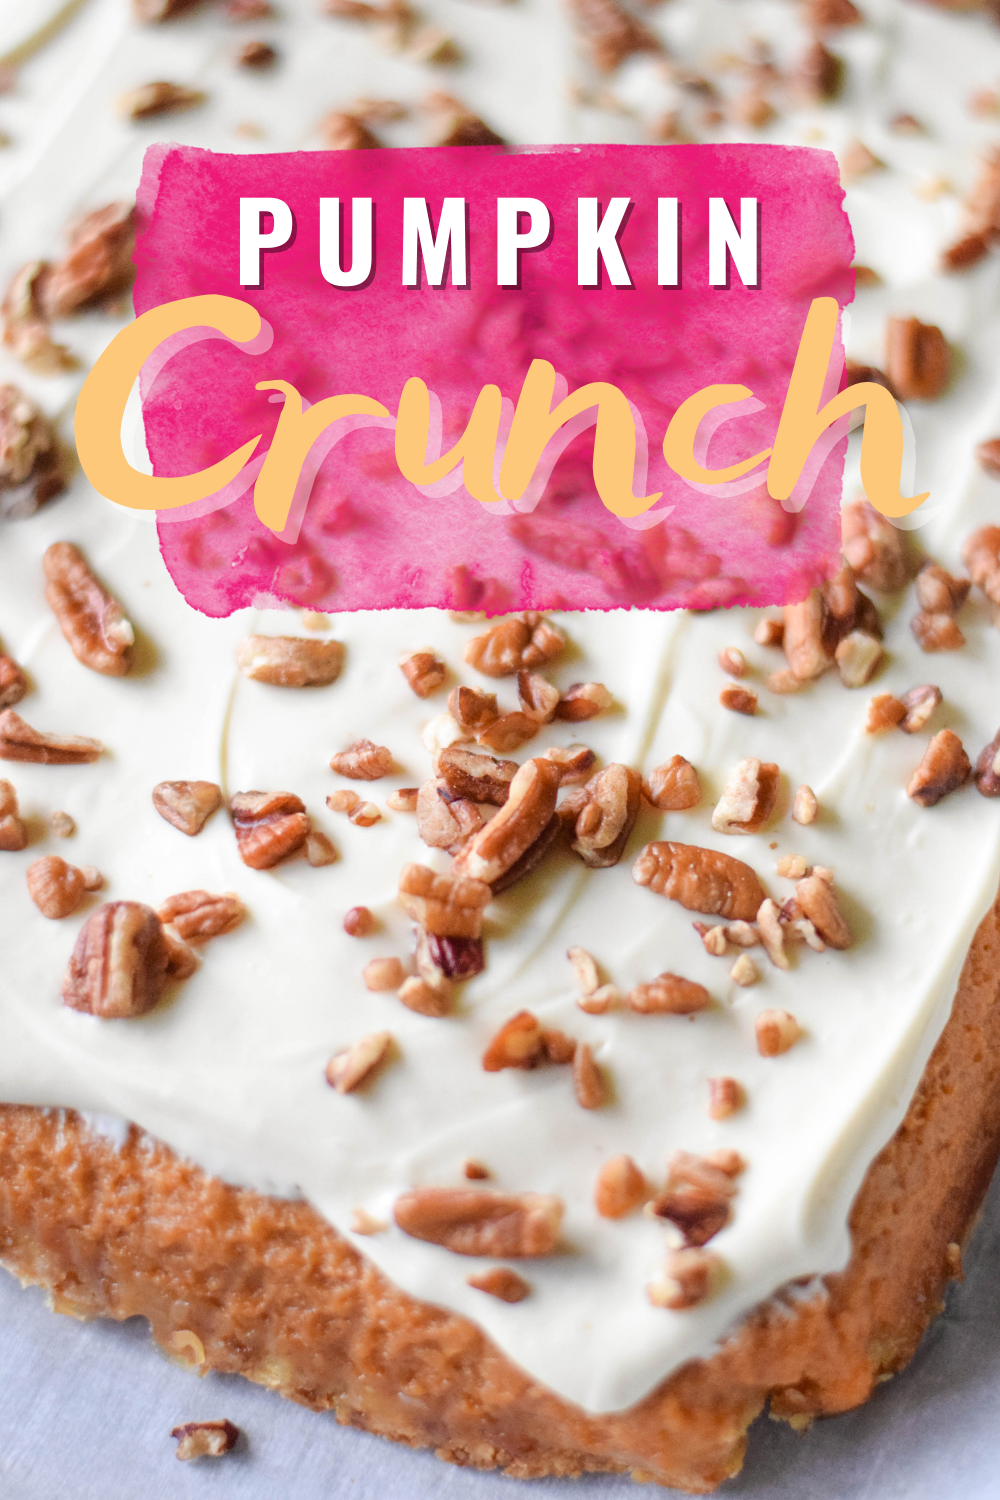 PUMPKIN CRUNCH - Pumpkin Crunch is a big deal in Hawaii! Today I'm sharing a very simple pumpkin crunch recipe for you to try this fall! | Easy Pumpkin Crunch - Pumpkin Crunch Recipe - Pumpkin Crunch Hawaii 